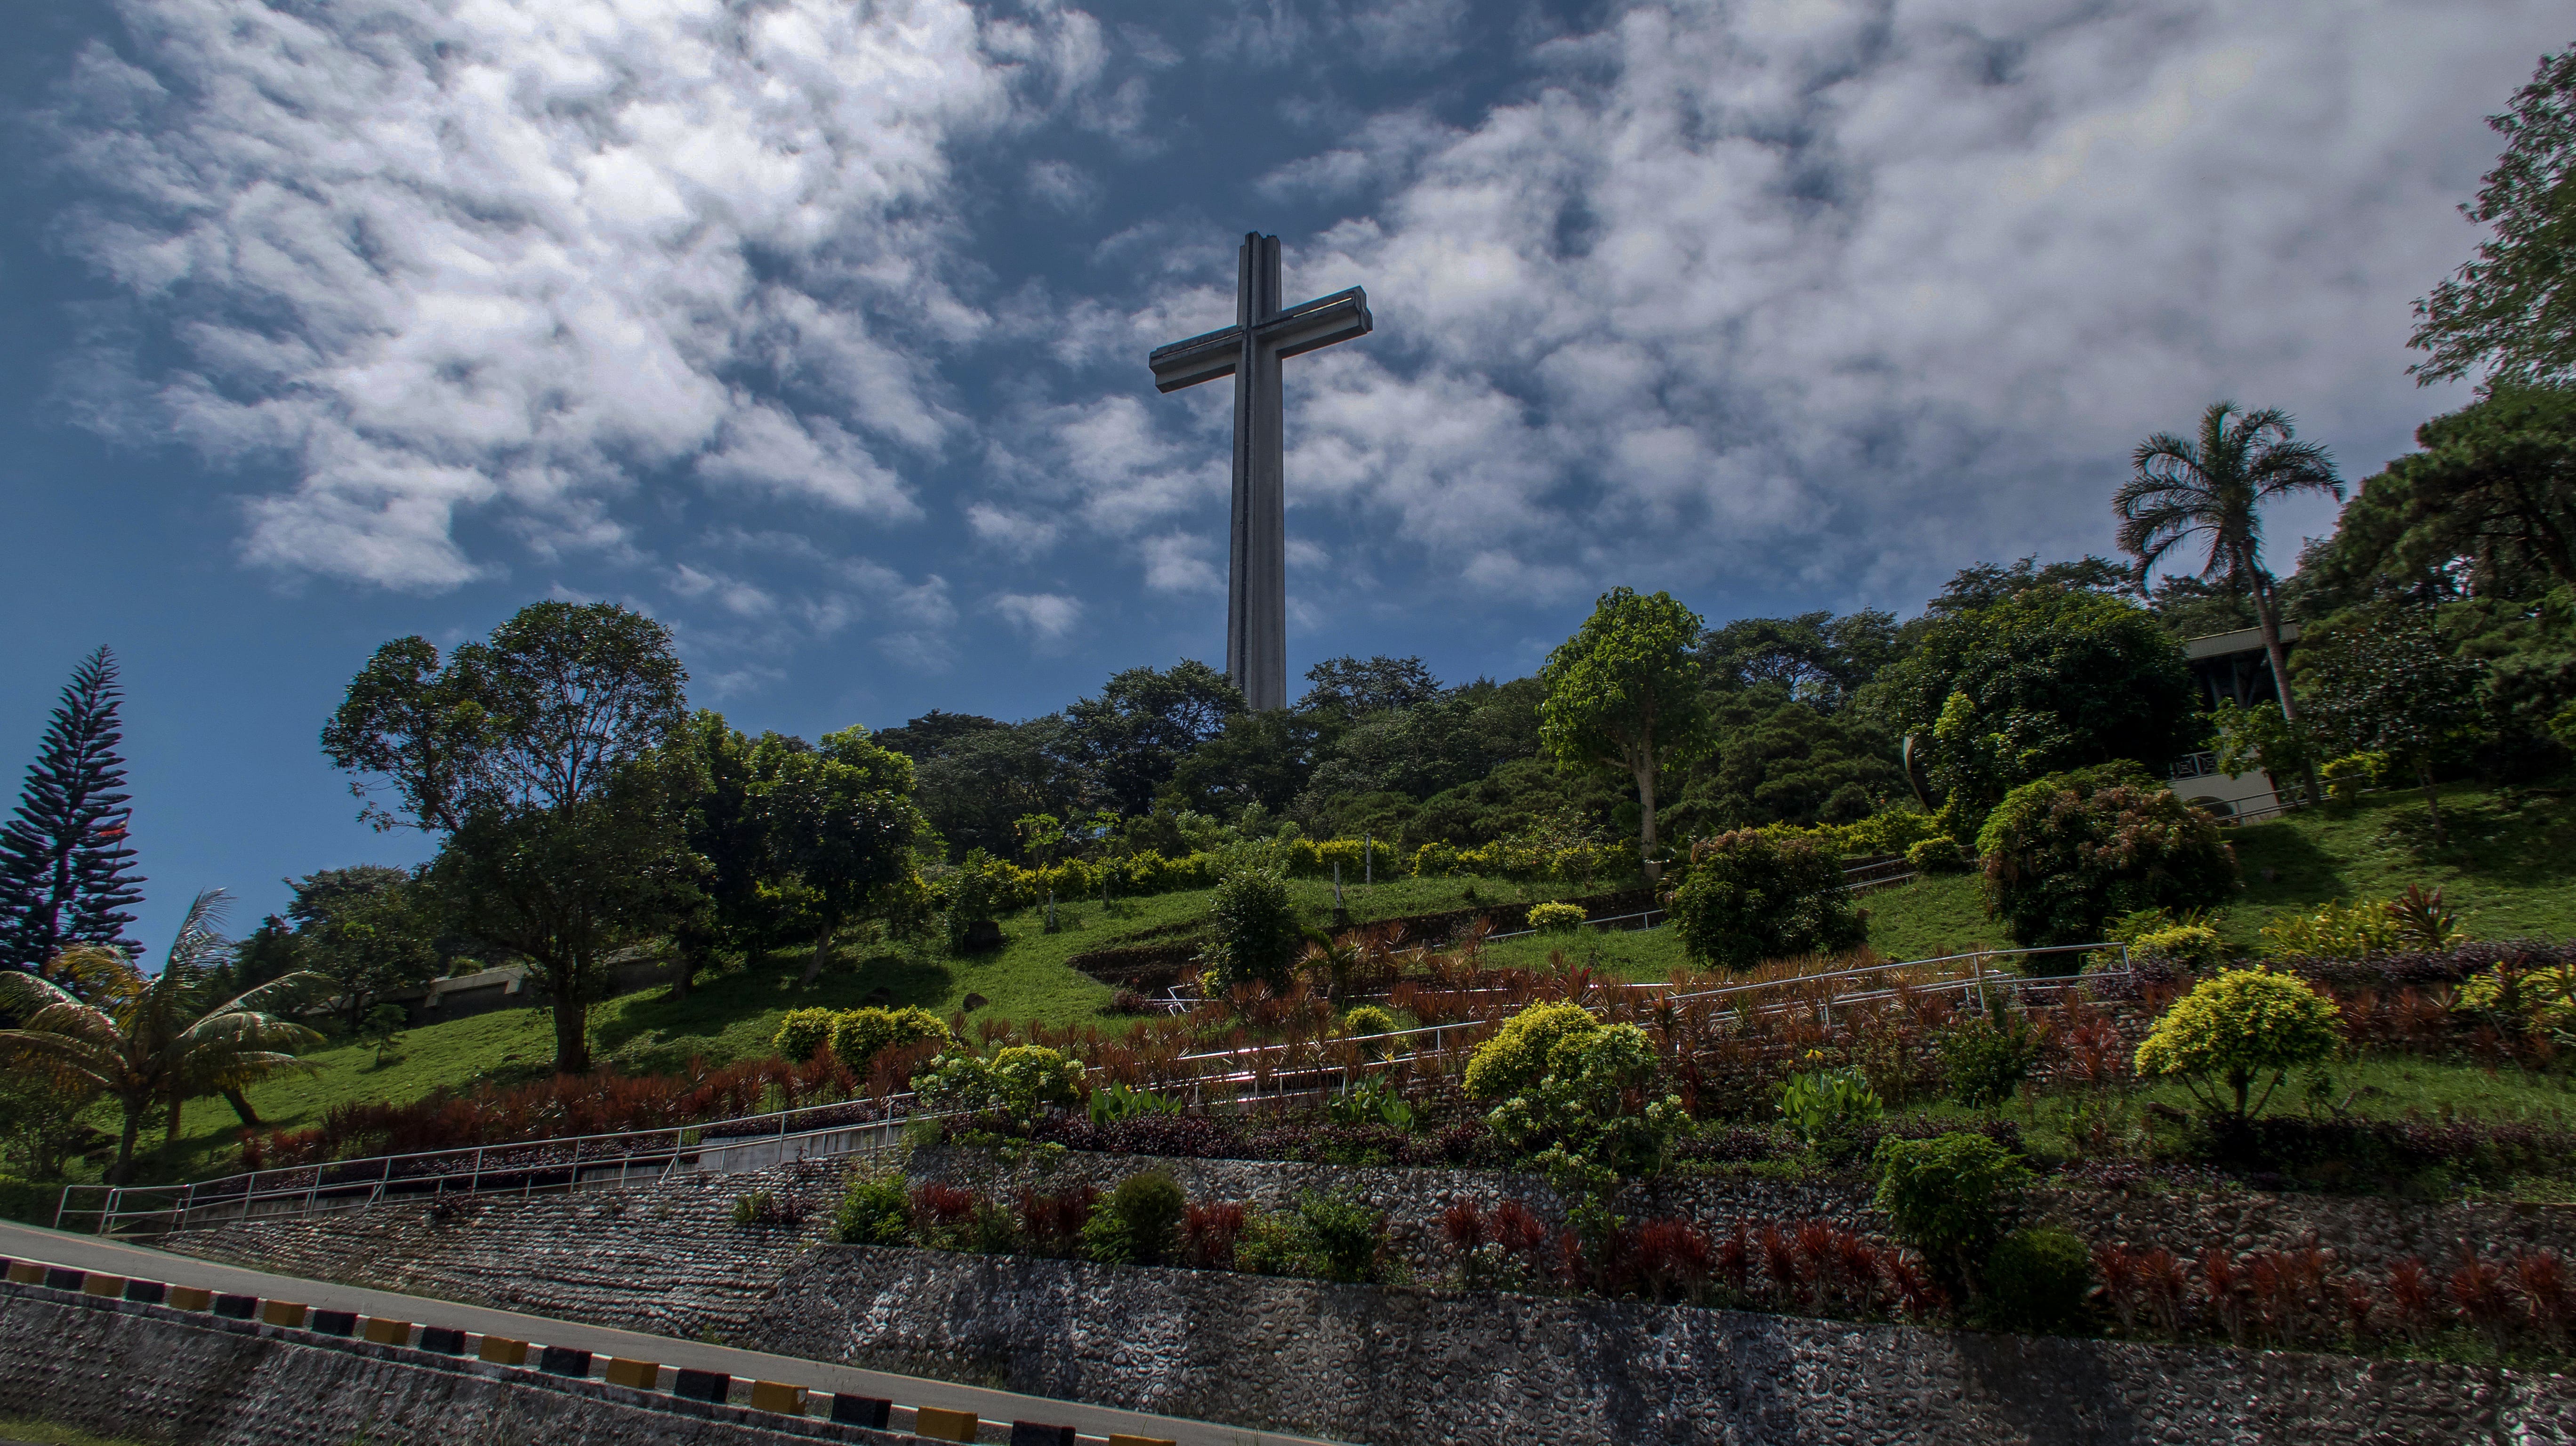 Memorial cross and well maintained gardens in bataan philippines